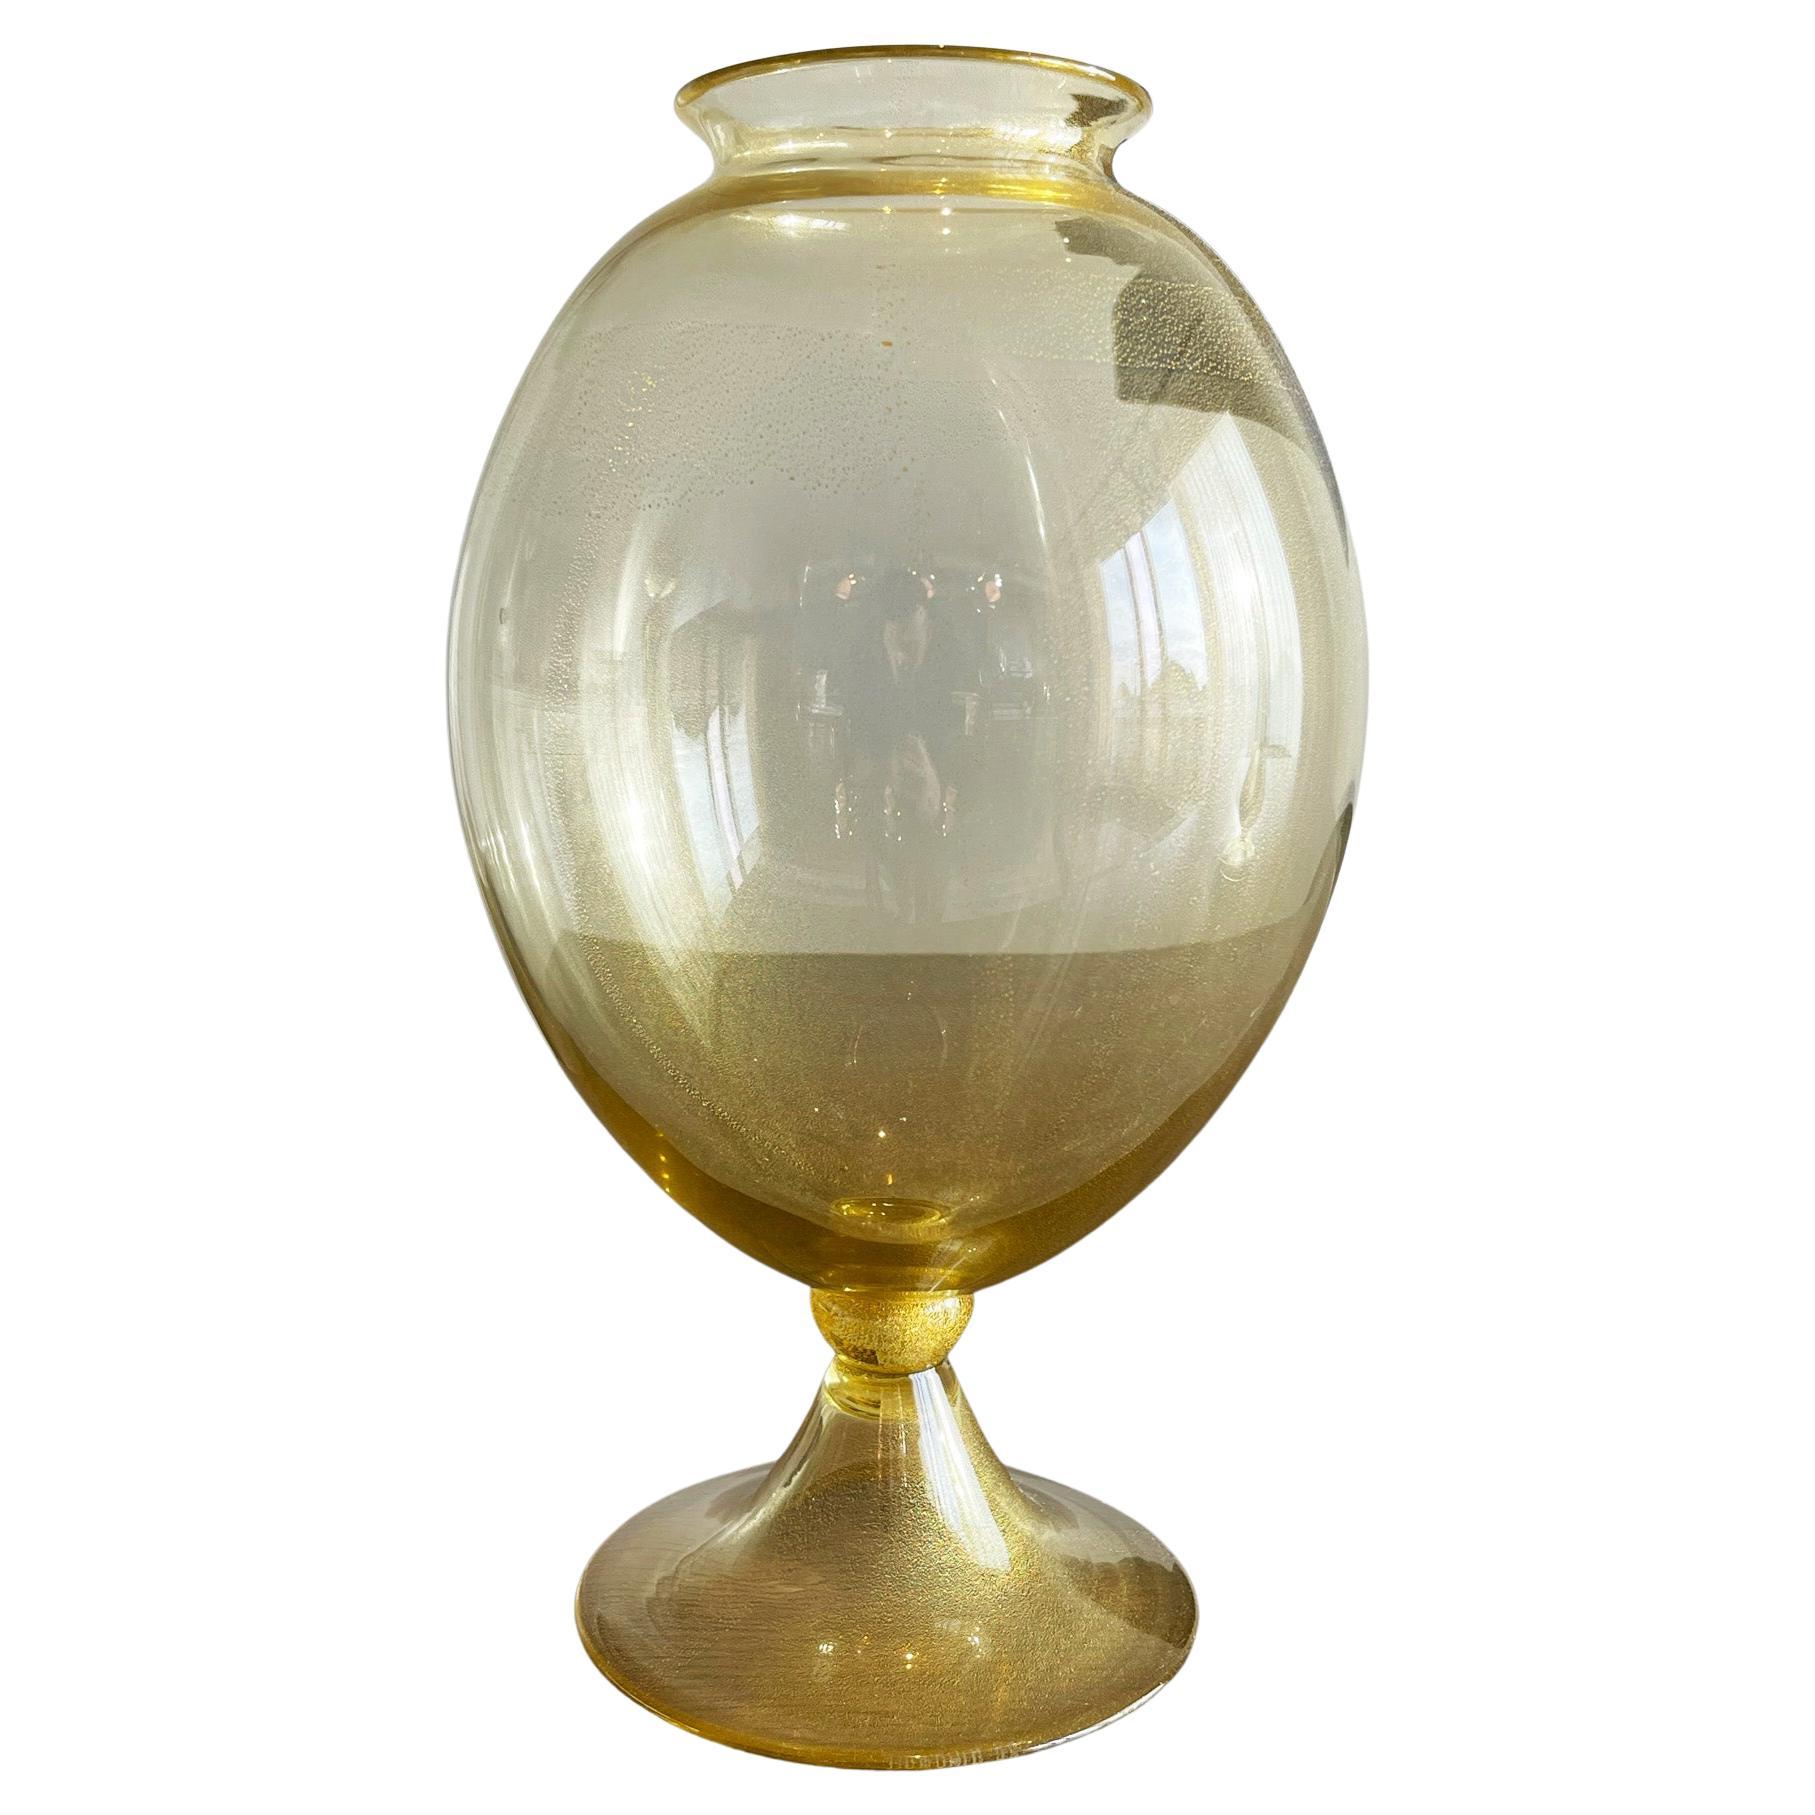 Seguso for Donghia - Large Modern Vase in Gold Murano Glass, Handblown, Signed